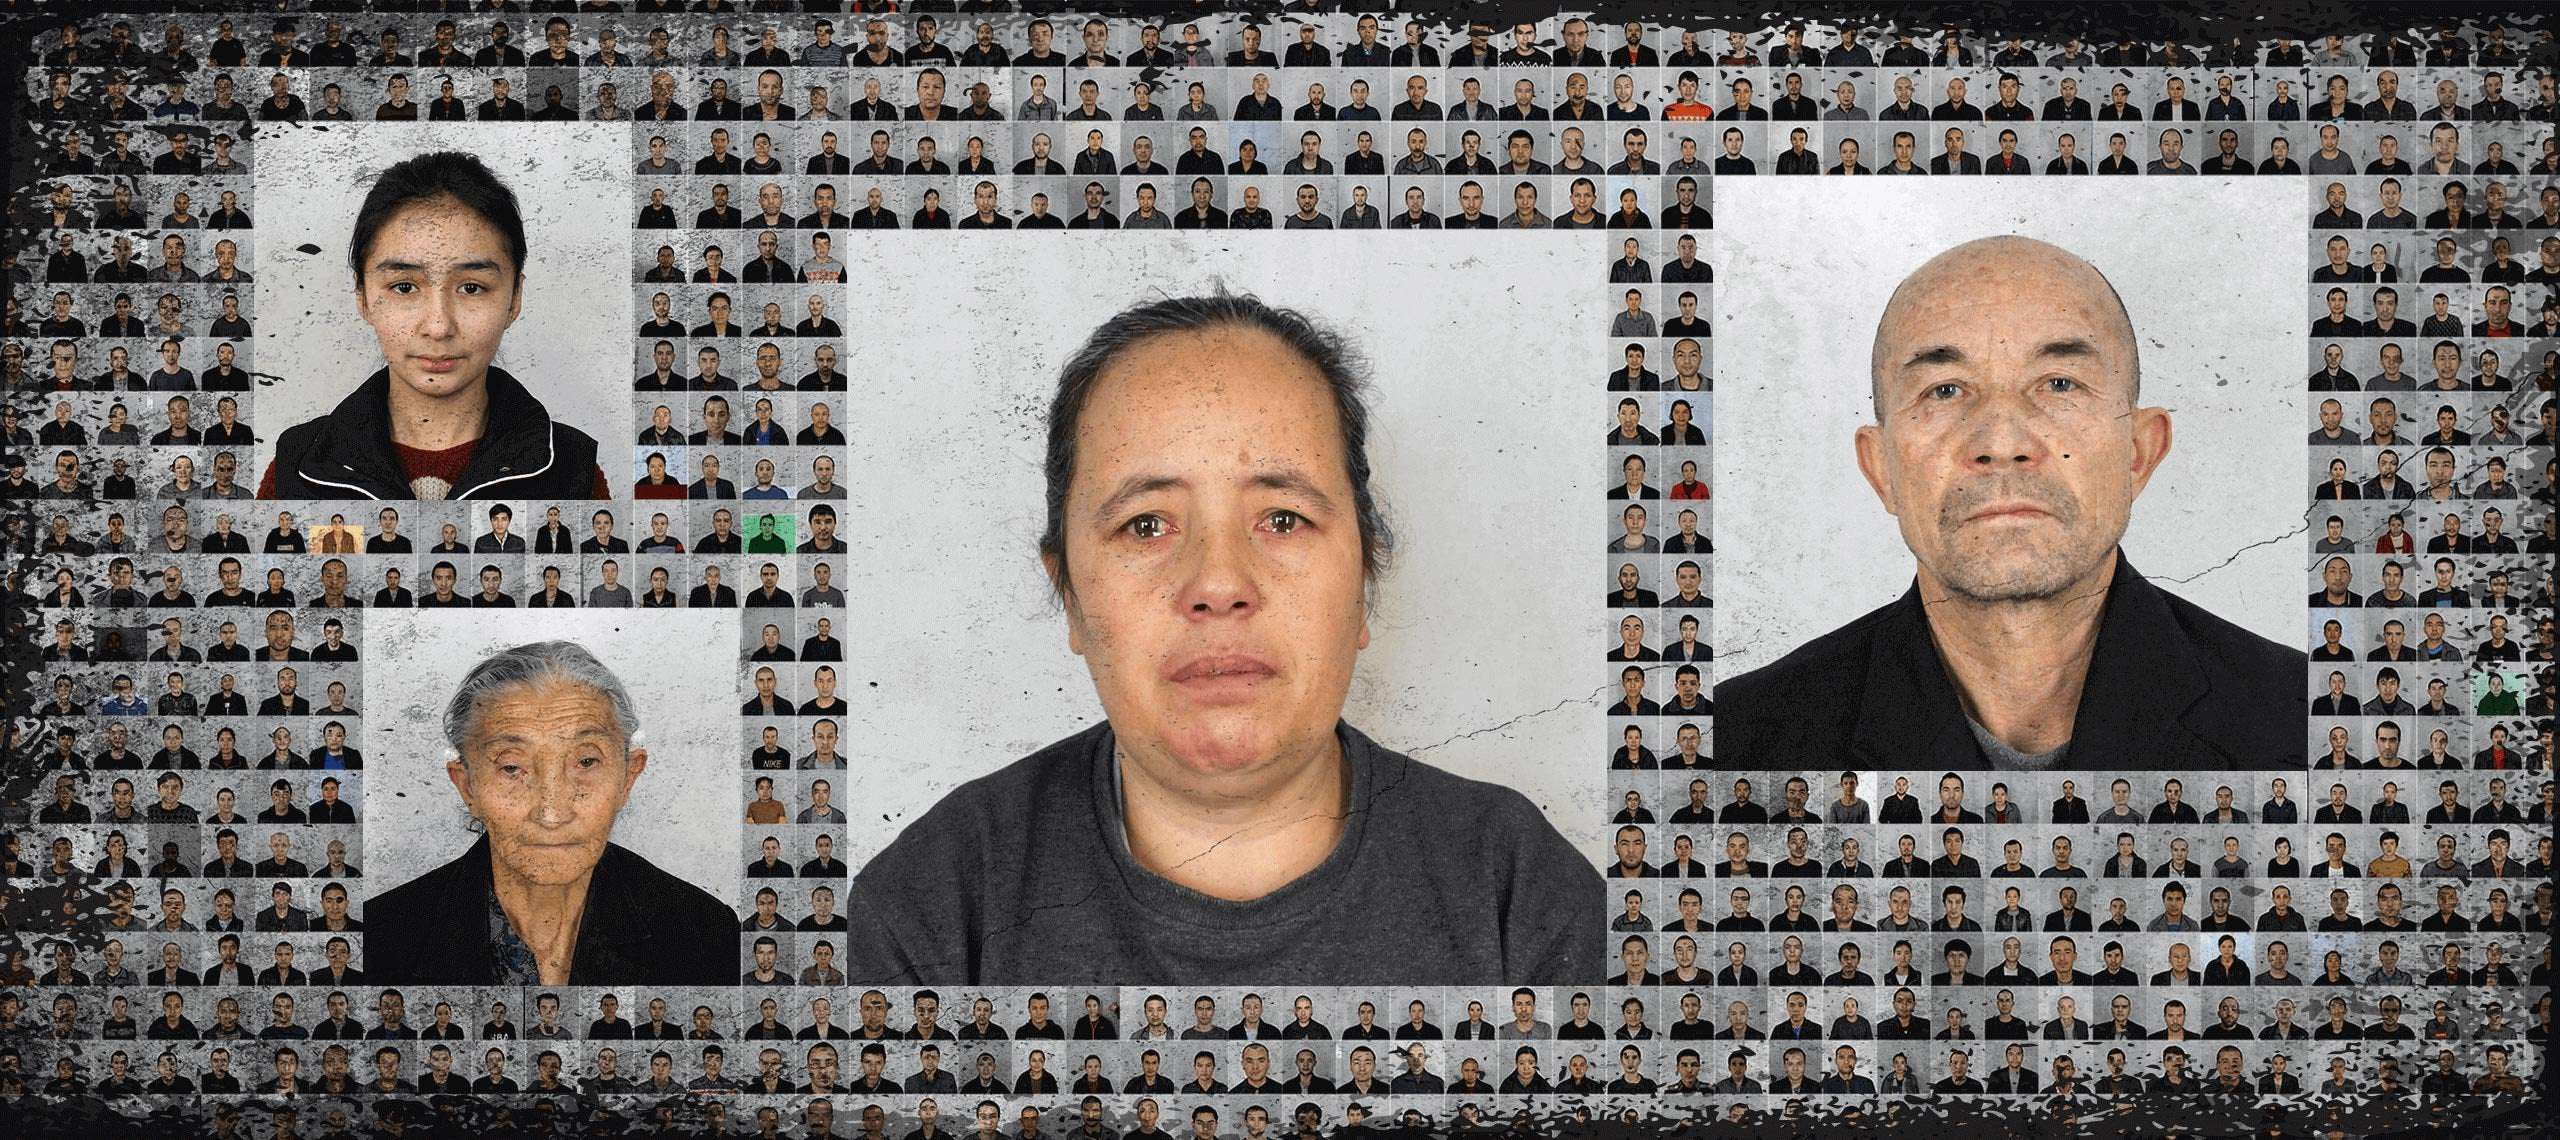 image for The faces from China’s Uyghur detention camps